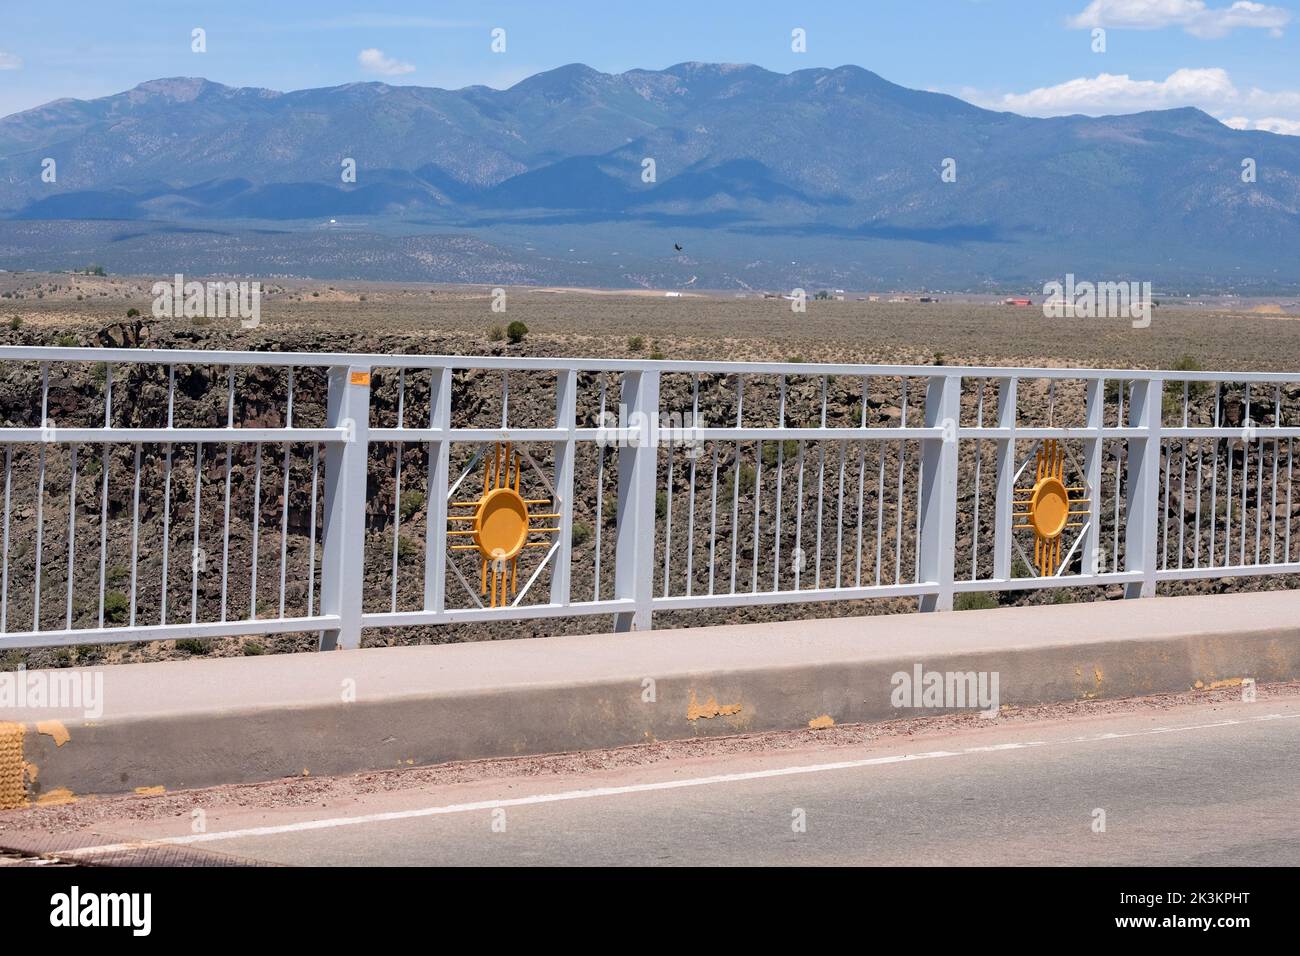 A bridge and scenic mountains in the background, New Mexico, USA Stock Photo